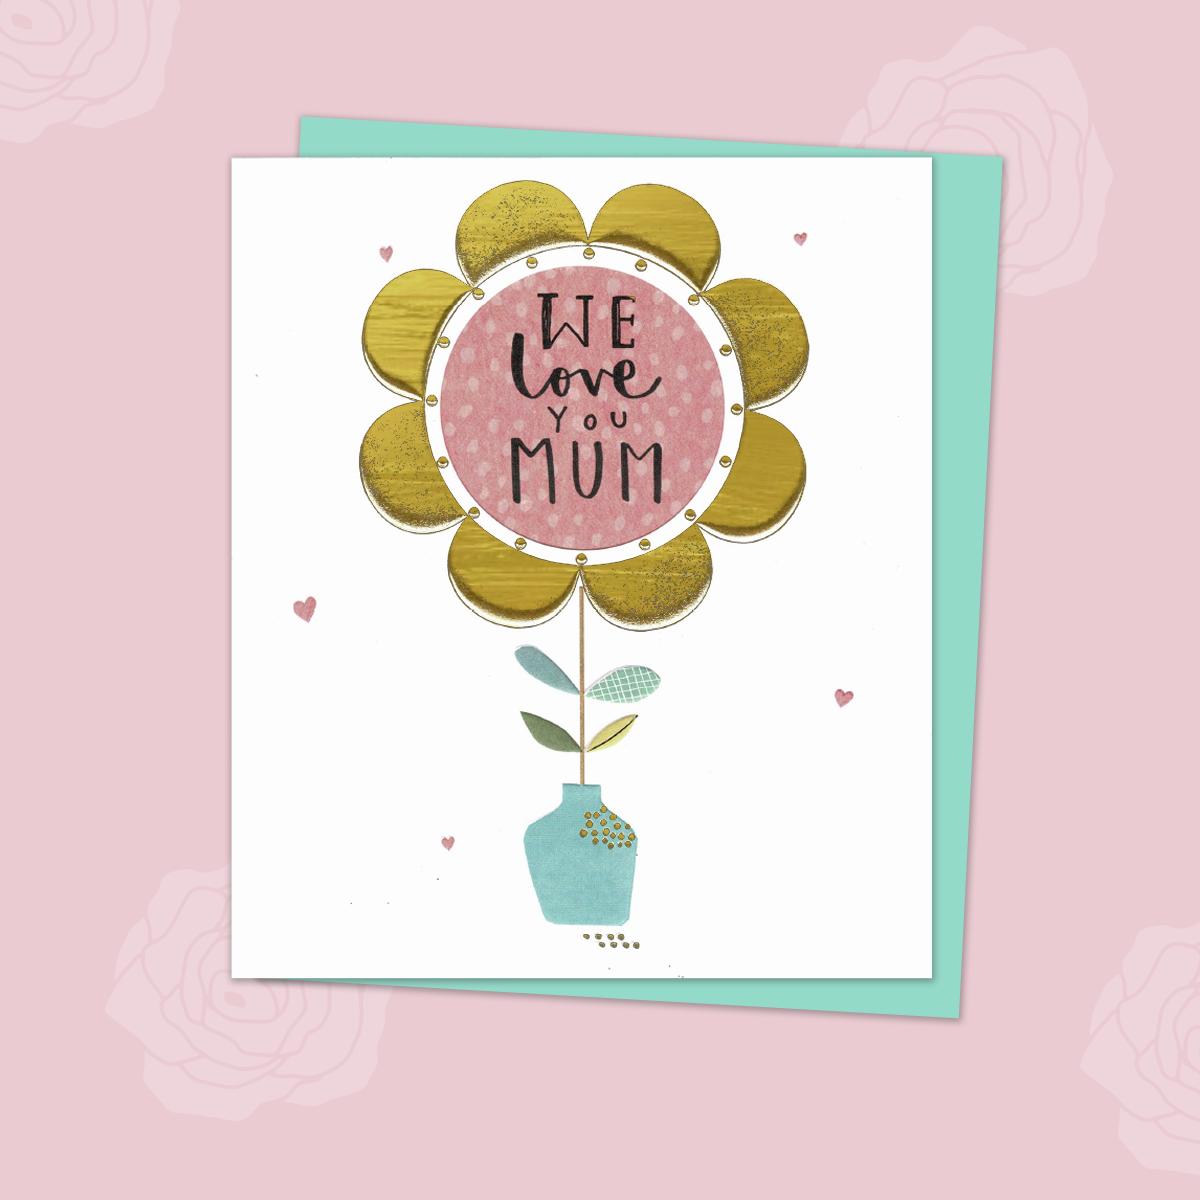 Lovely Mother's Day Card With Cut Out Gold Foiled Flower. Complete With Turquoise Envelope